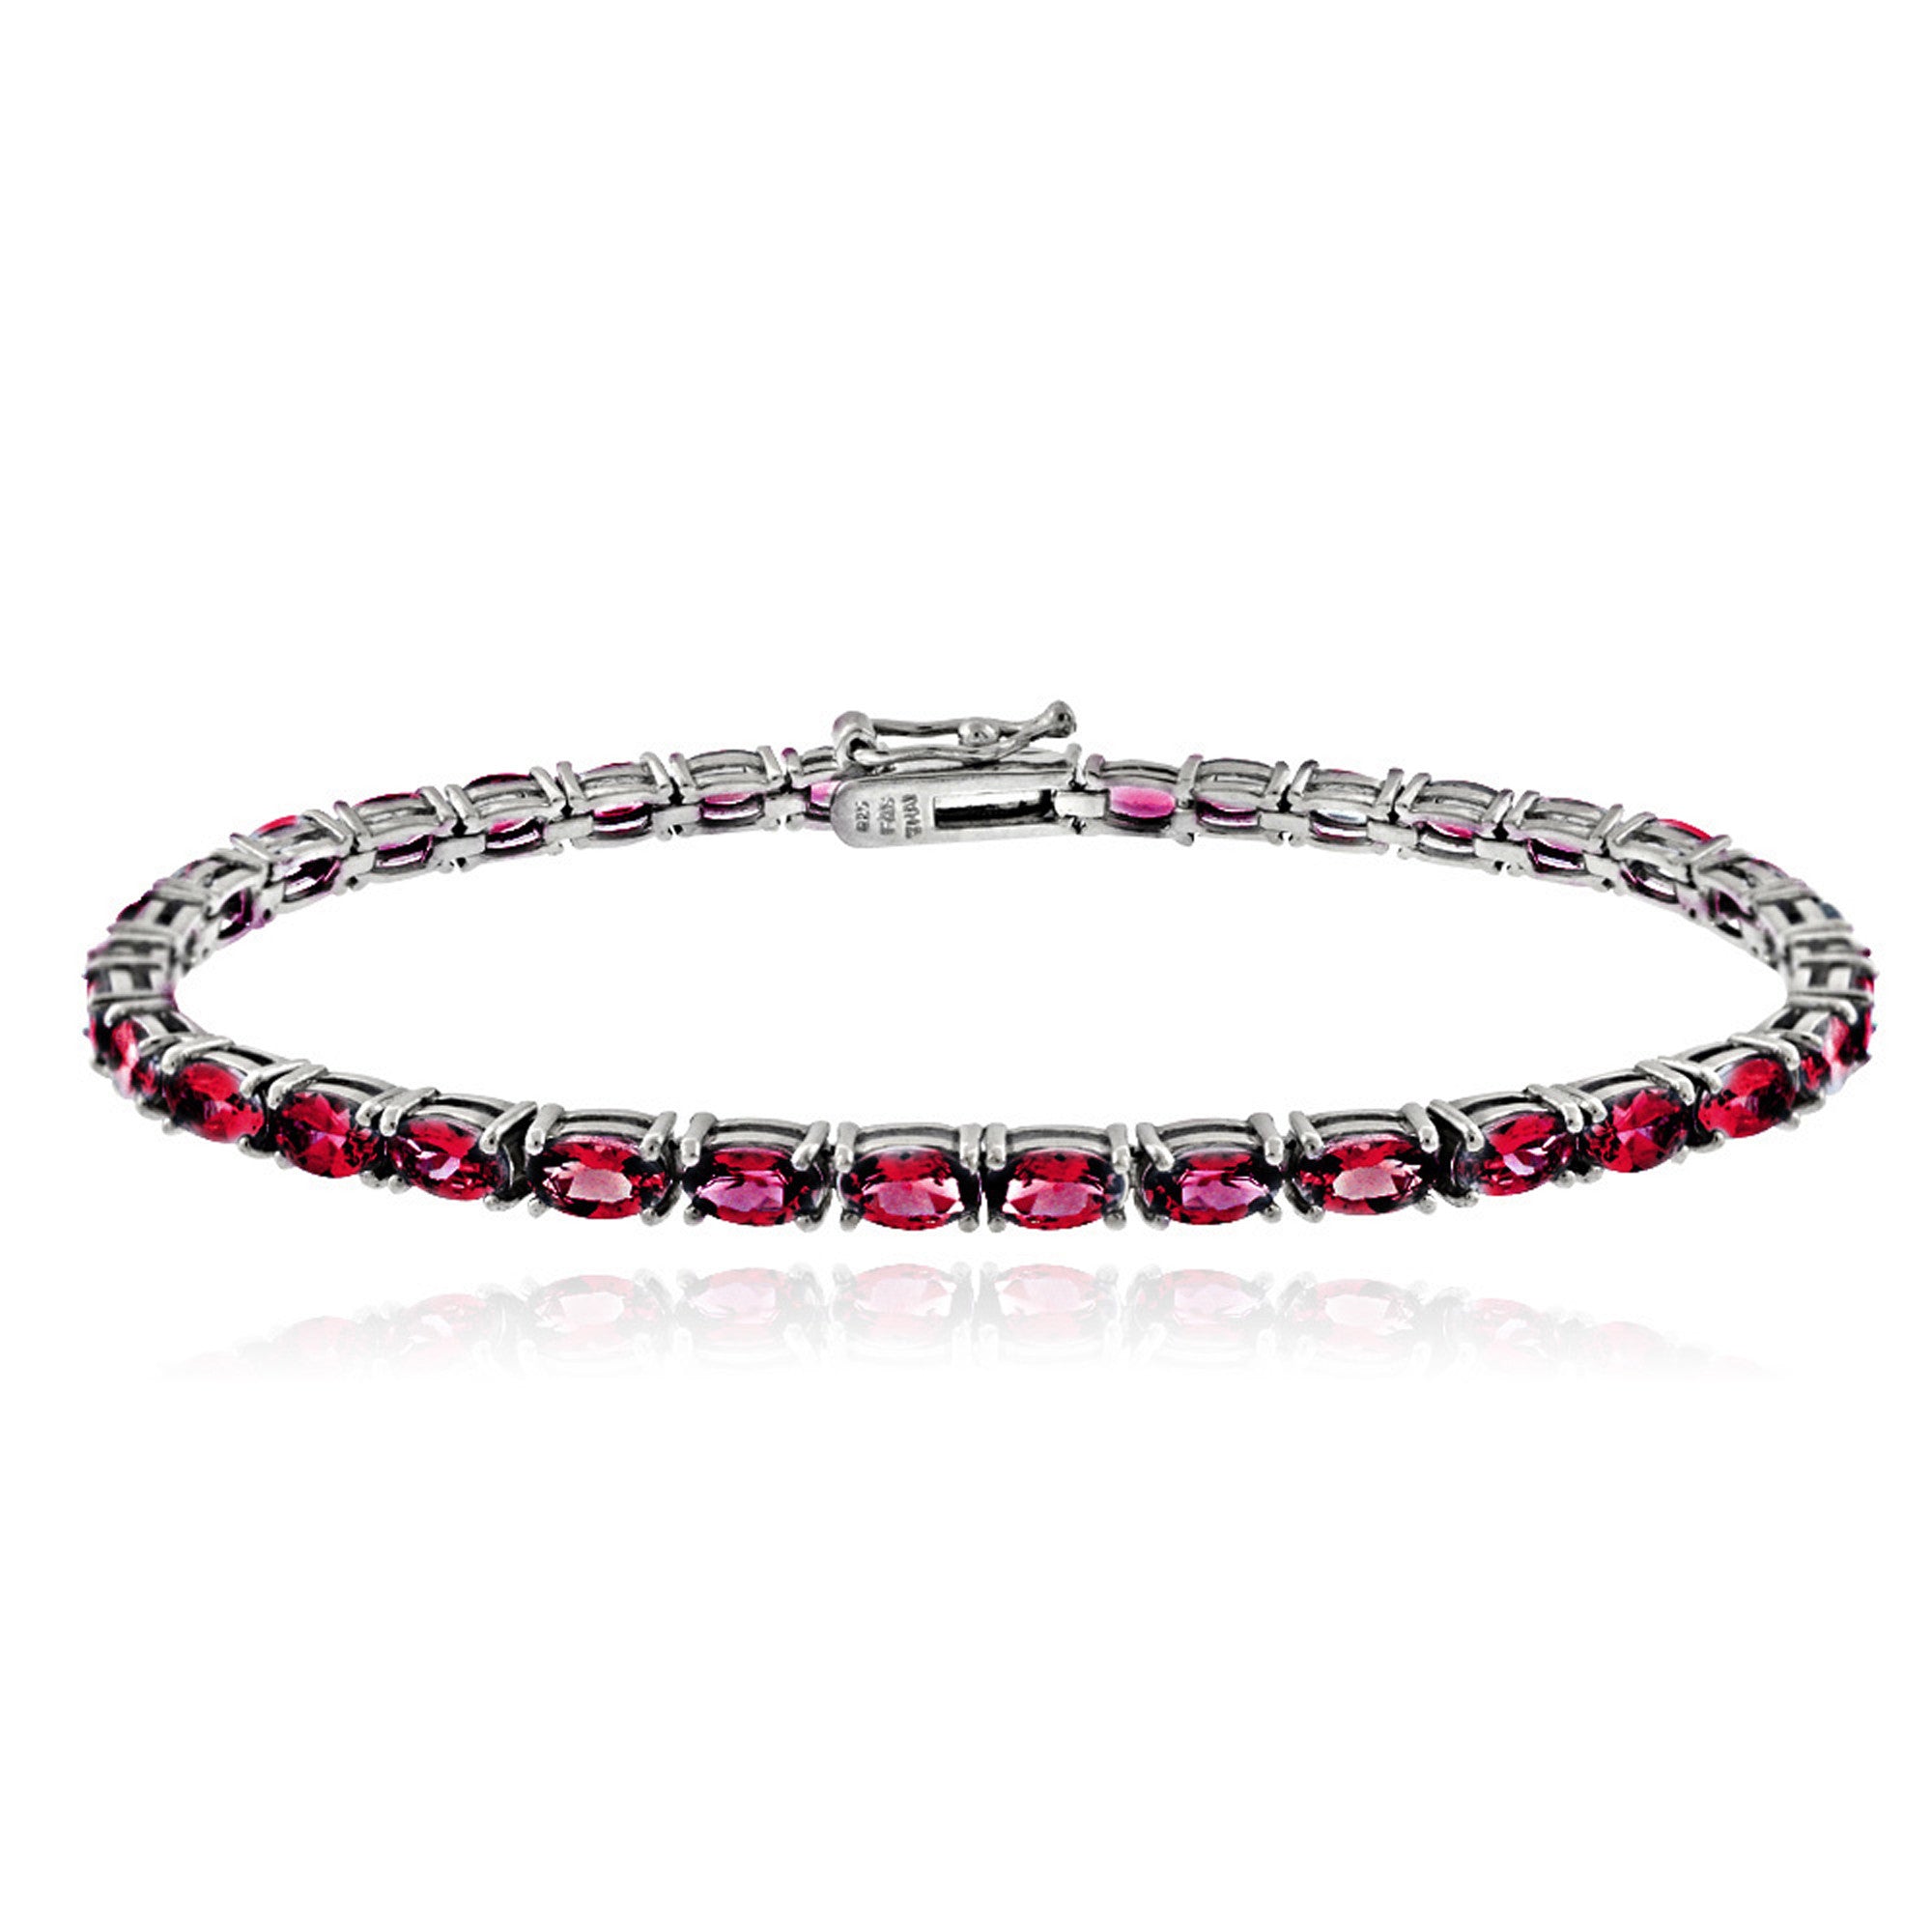 Birthstone Tennis Bracelet With CZ & Gem Accents in Sterling Silver - July Created Ruby